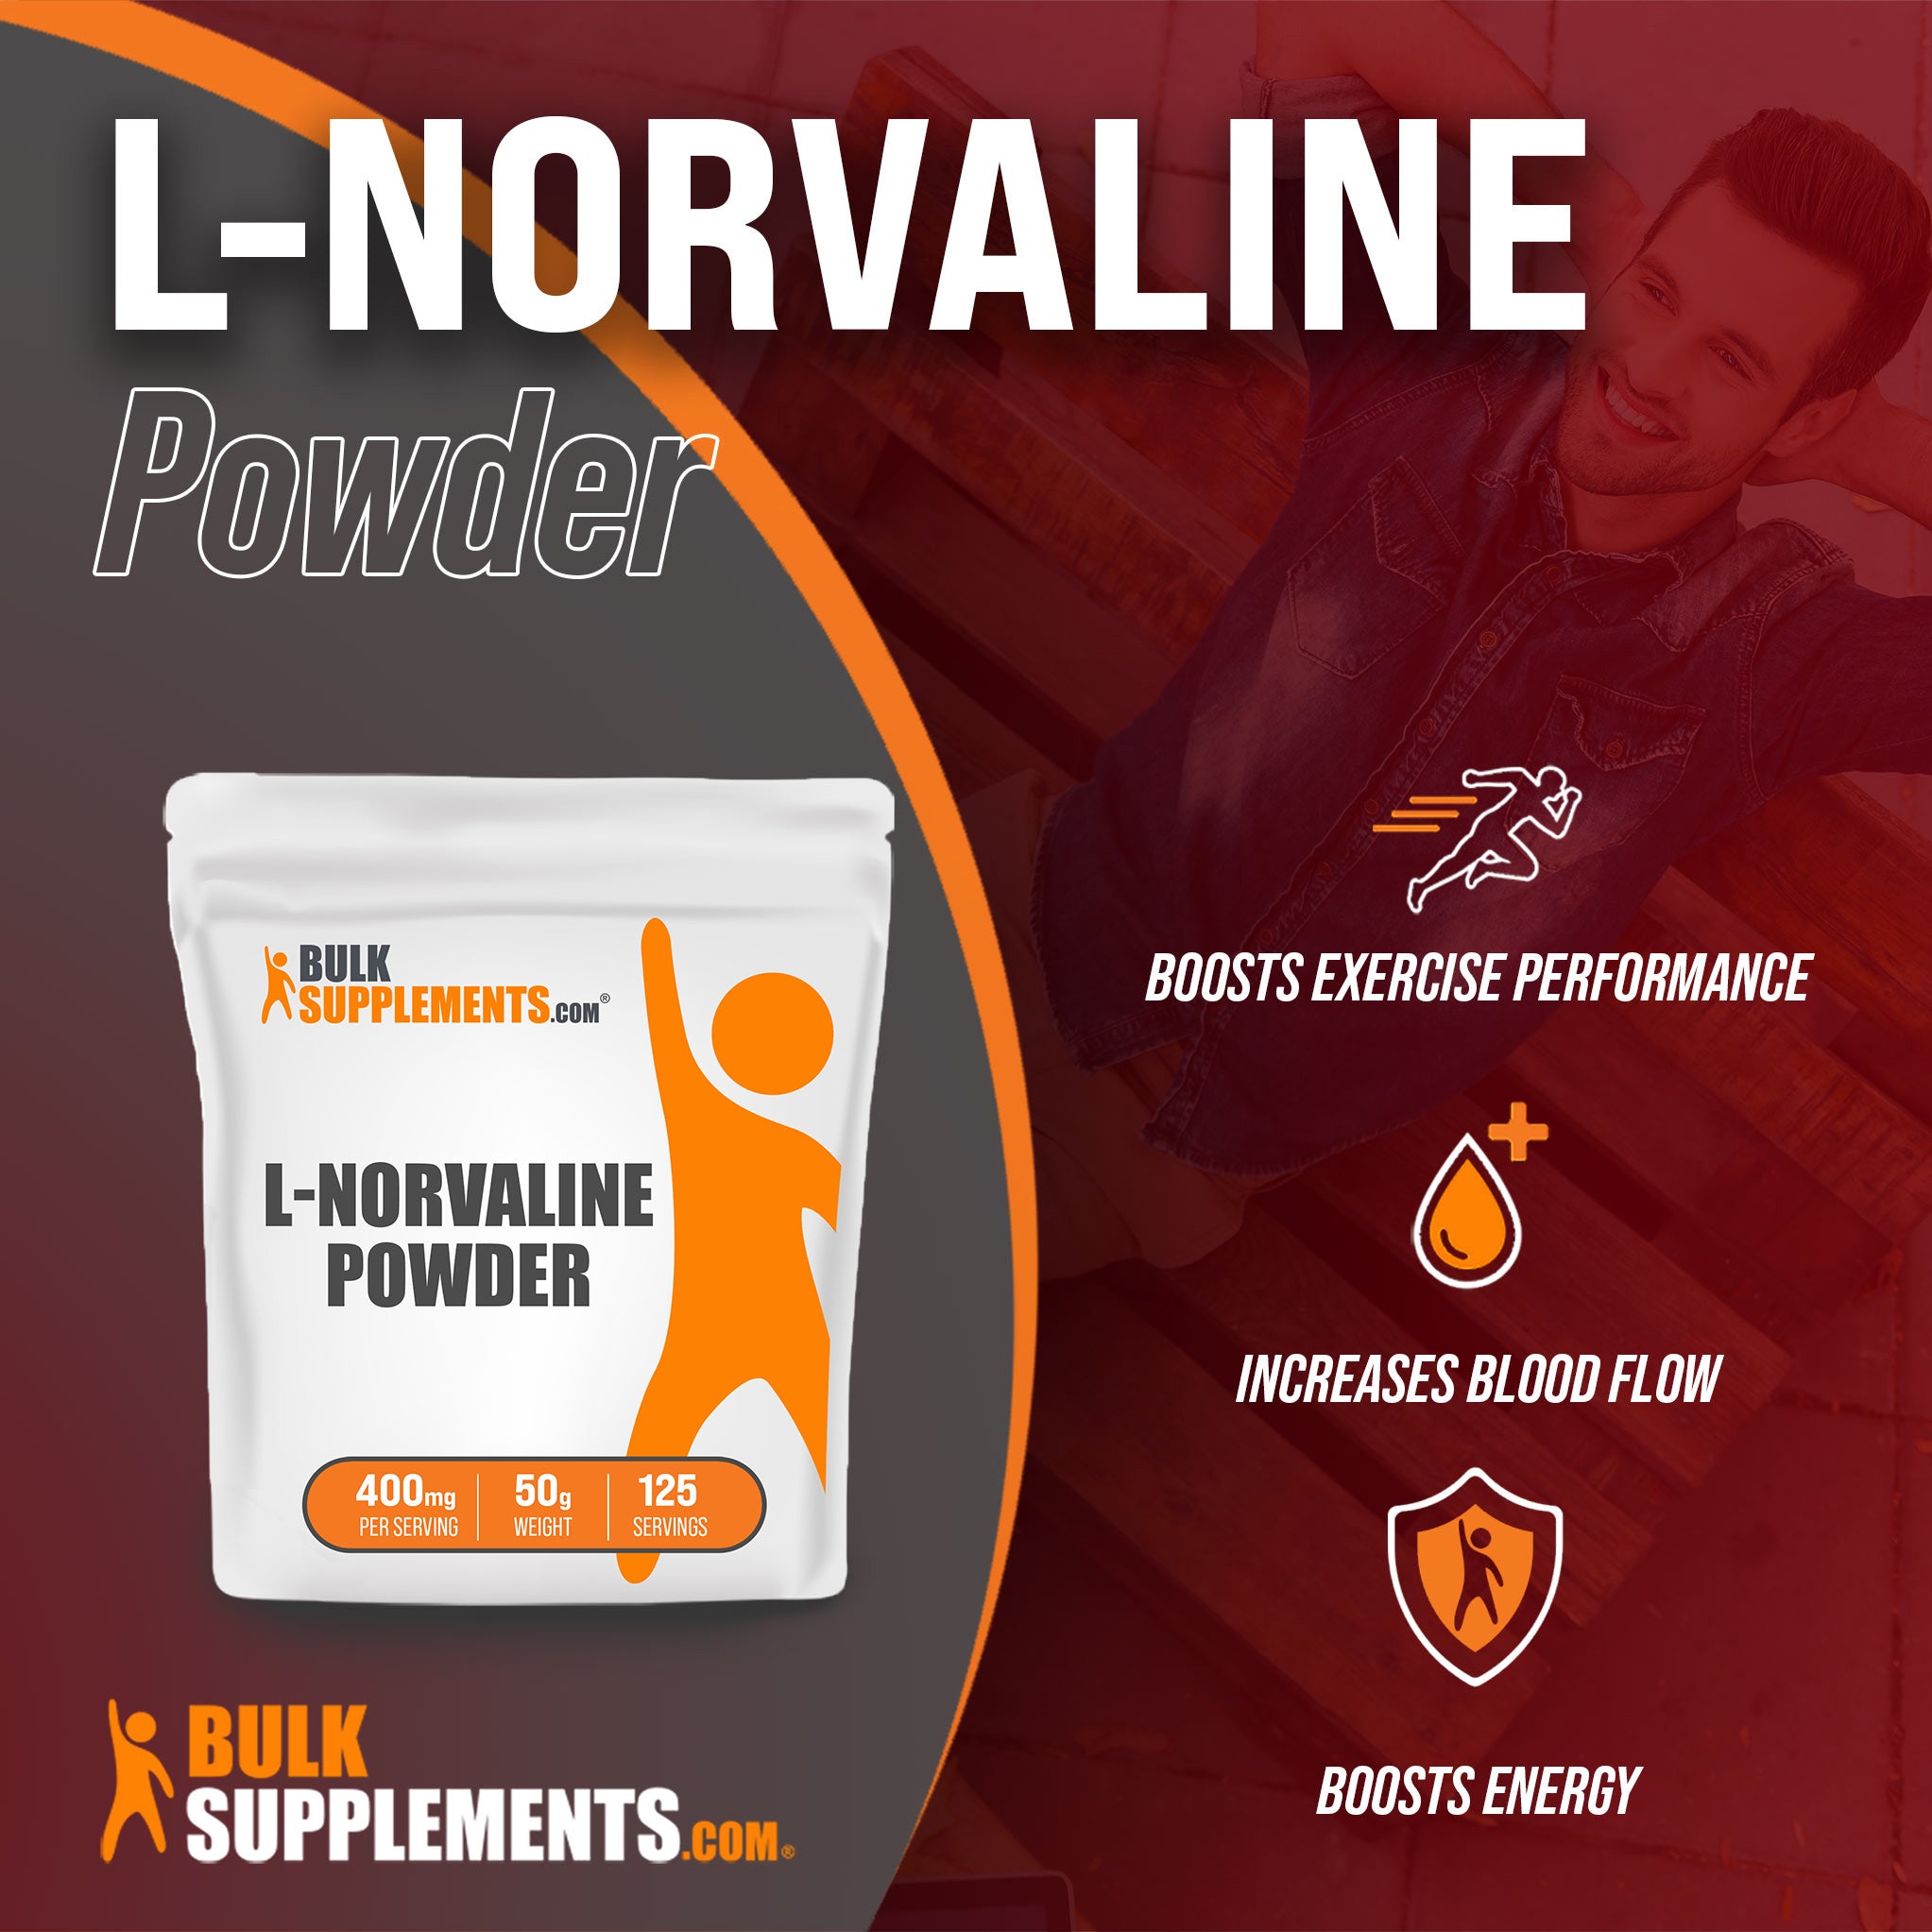 Benefits of L-Norvaline: boosts exercise performance, increases blood flow, boosts energy